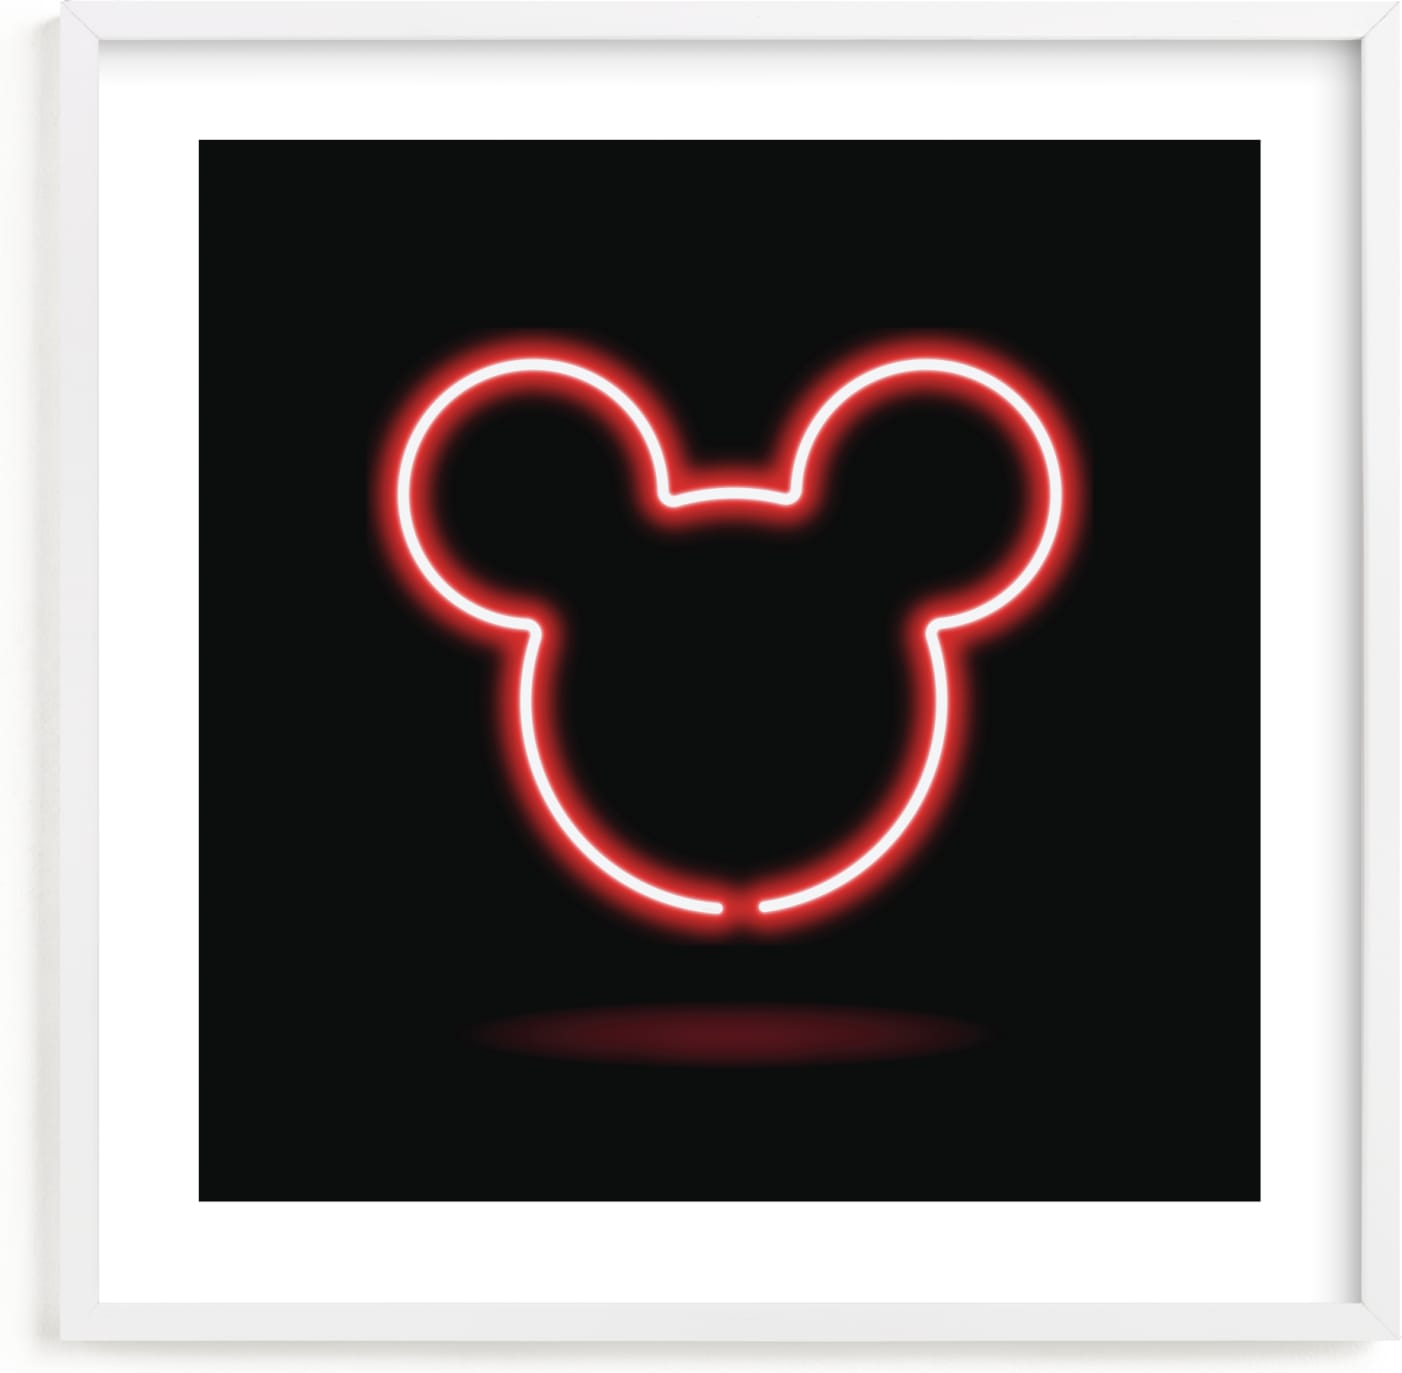 This is a black disney art by Kennedi Shaw called Late Night Disney Mickey Mouse.